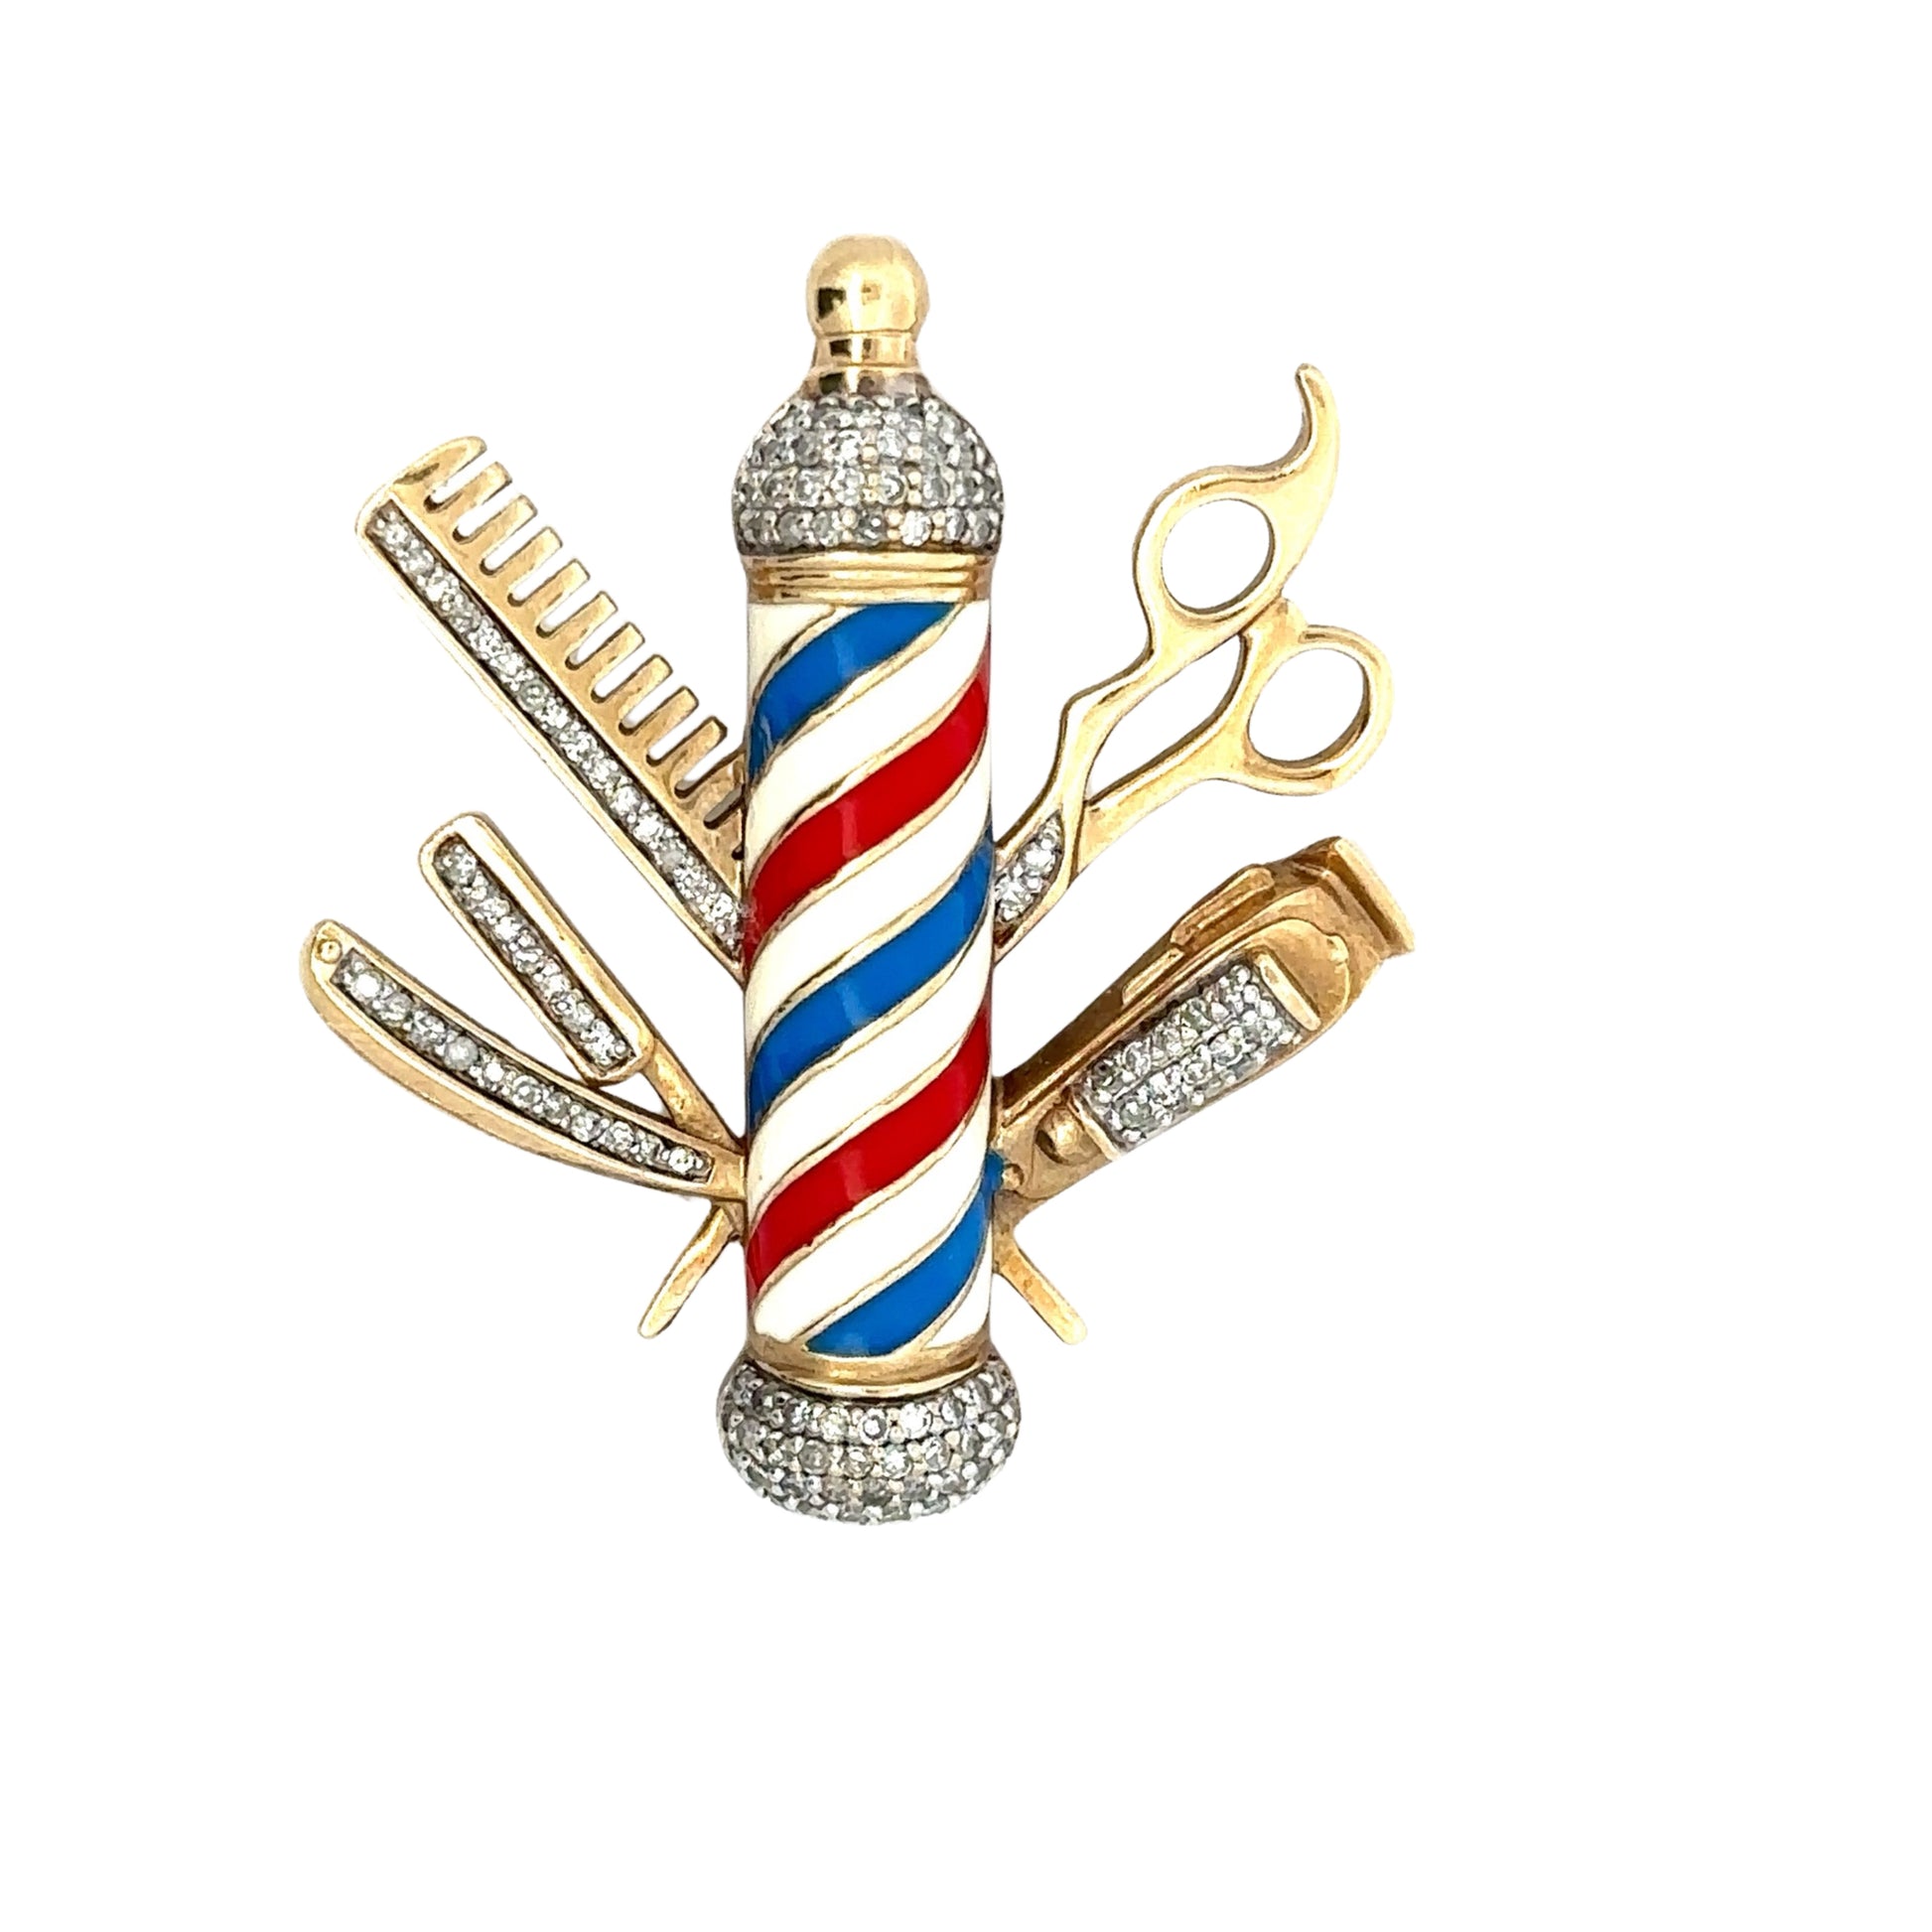 Front of Barber kit pendant with red, blue, + white pole. Diamond scissors + diamond clippers on one side. Diamond comb + diamond shaver on other side. Diamonds on top and bottom of pole.